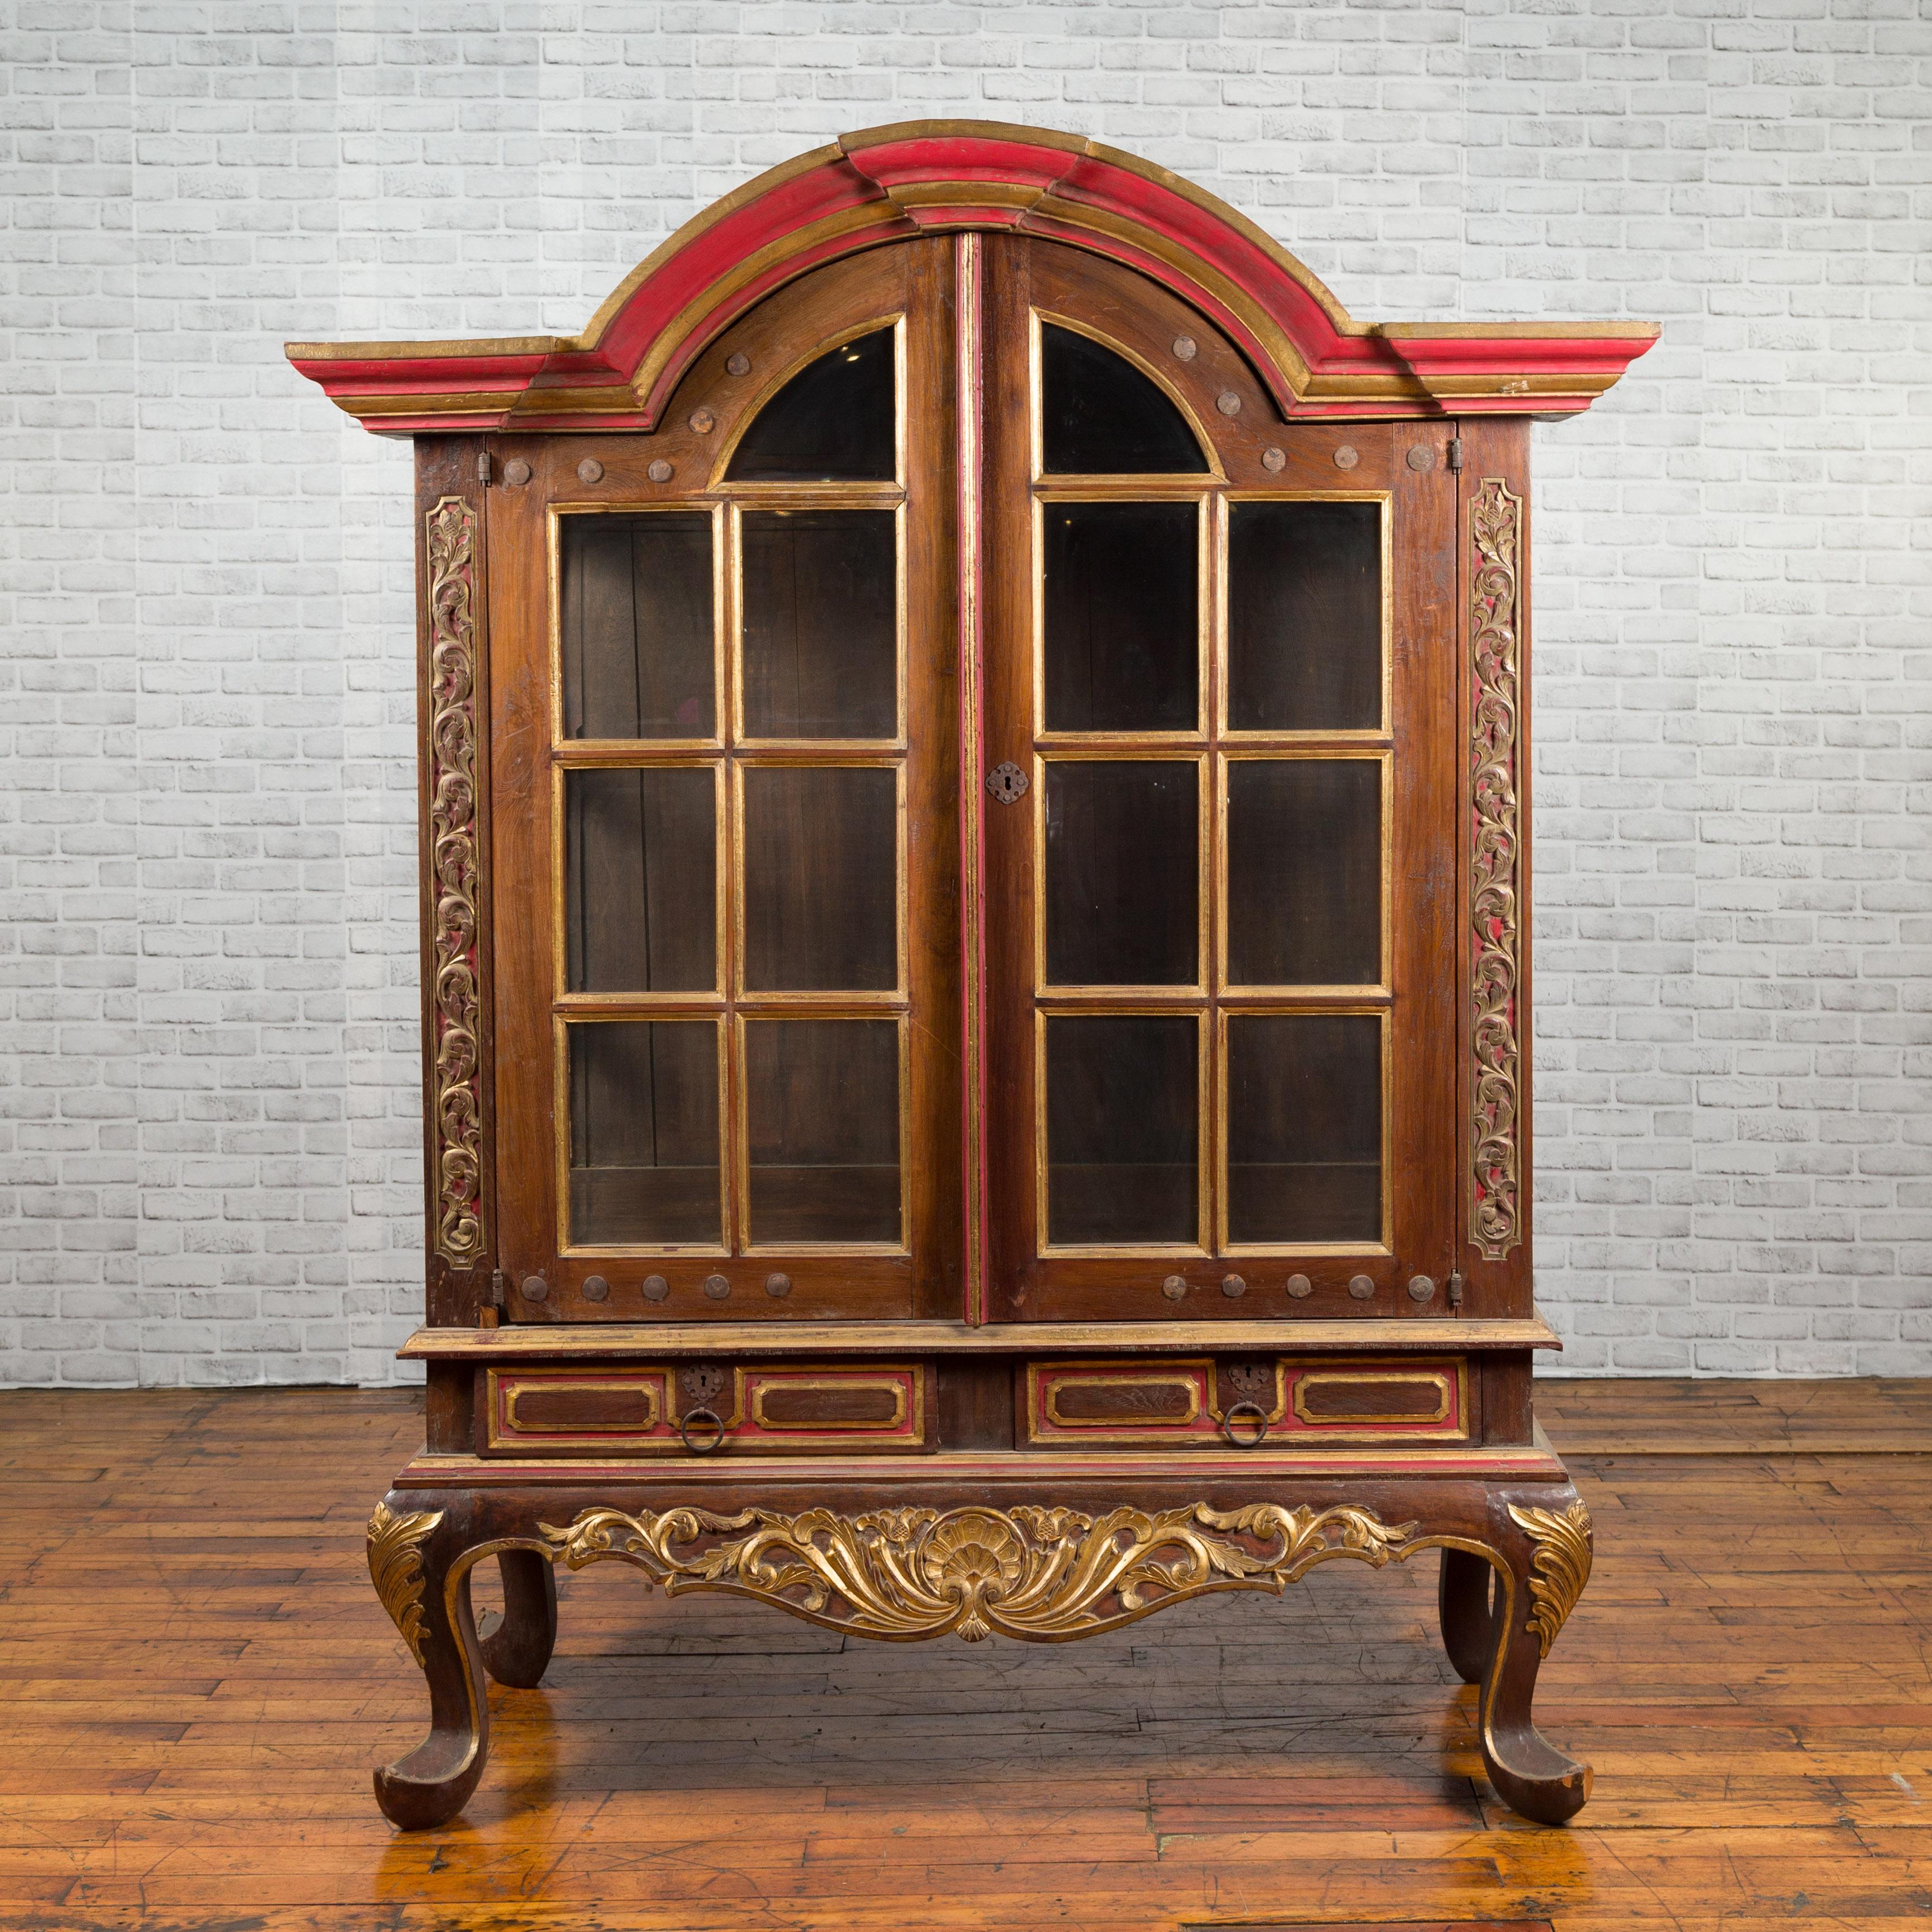 A Dutch Colonial period Indonesian cabinet from the early 20th century, with bonnet top, glass doors and red and gilded accents. Created in Indonesia during the early years of the 20th century, this Dutch Colonial cabinet features a handsome bonnet